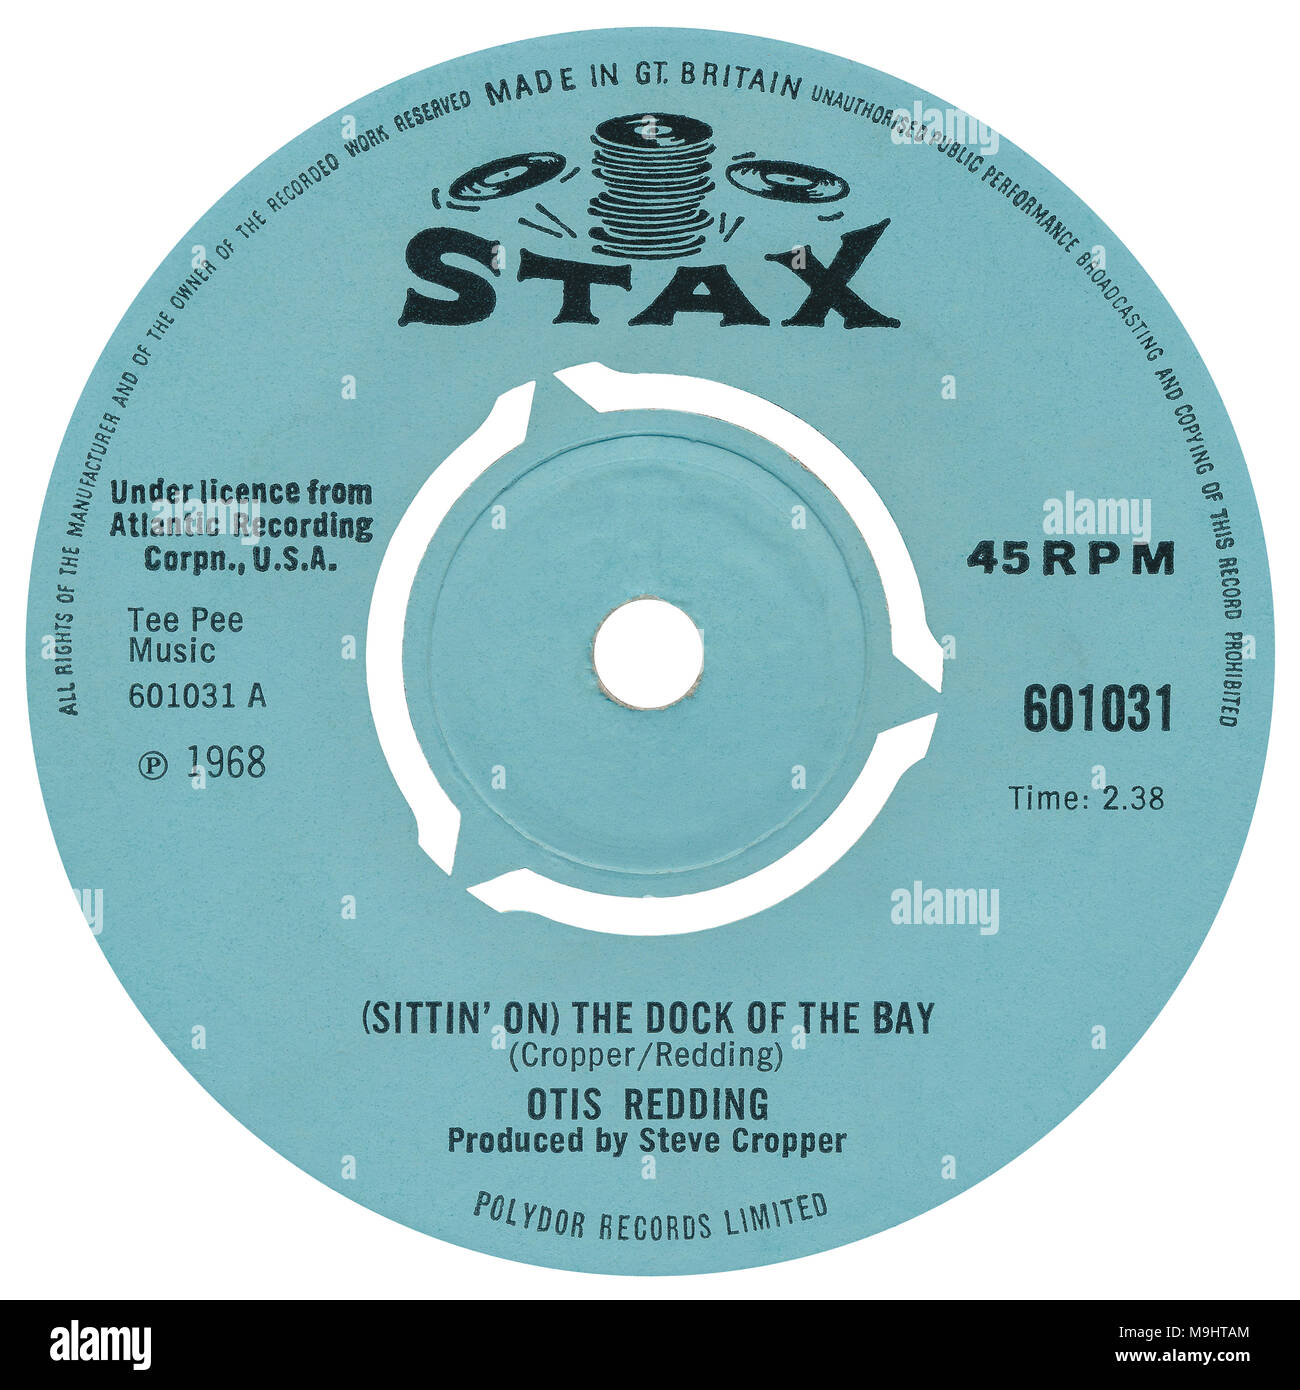 45 RPM 7' UK record label of (Sittin' On) The Dock Of The Bay by Otis Redding. Written by Steve Cropper and Otis Redding and produced by Steve Cropper. Released by Stax Records in February 1968. Stock Photo